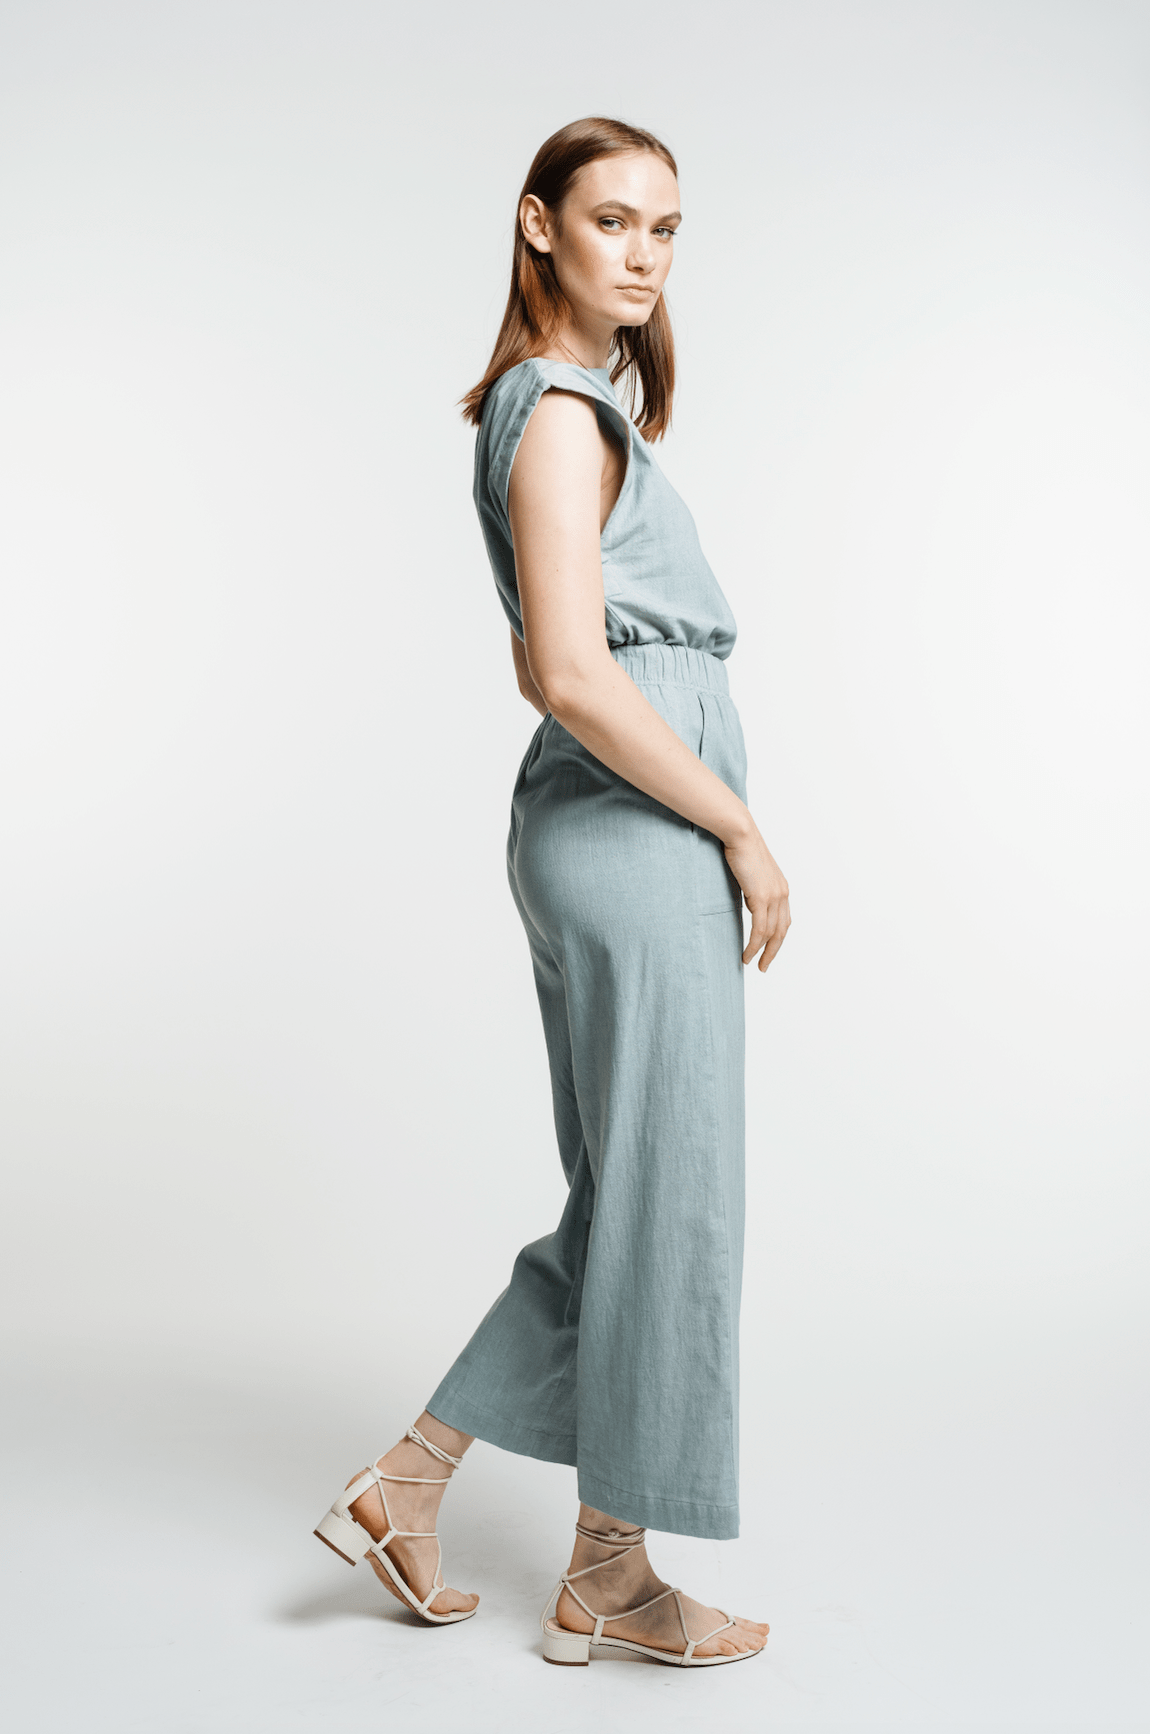 A woman in the Everyday Crop Pant - Cielo standing on a white background.